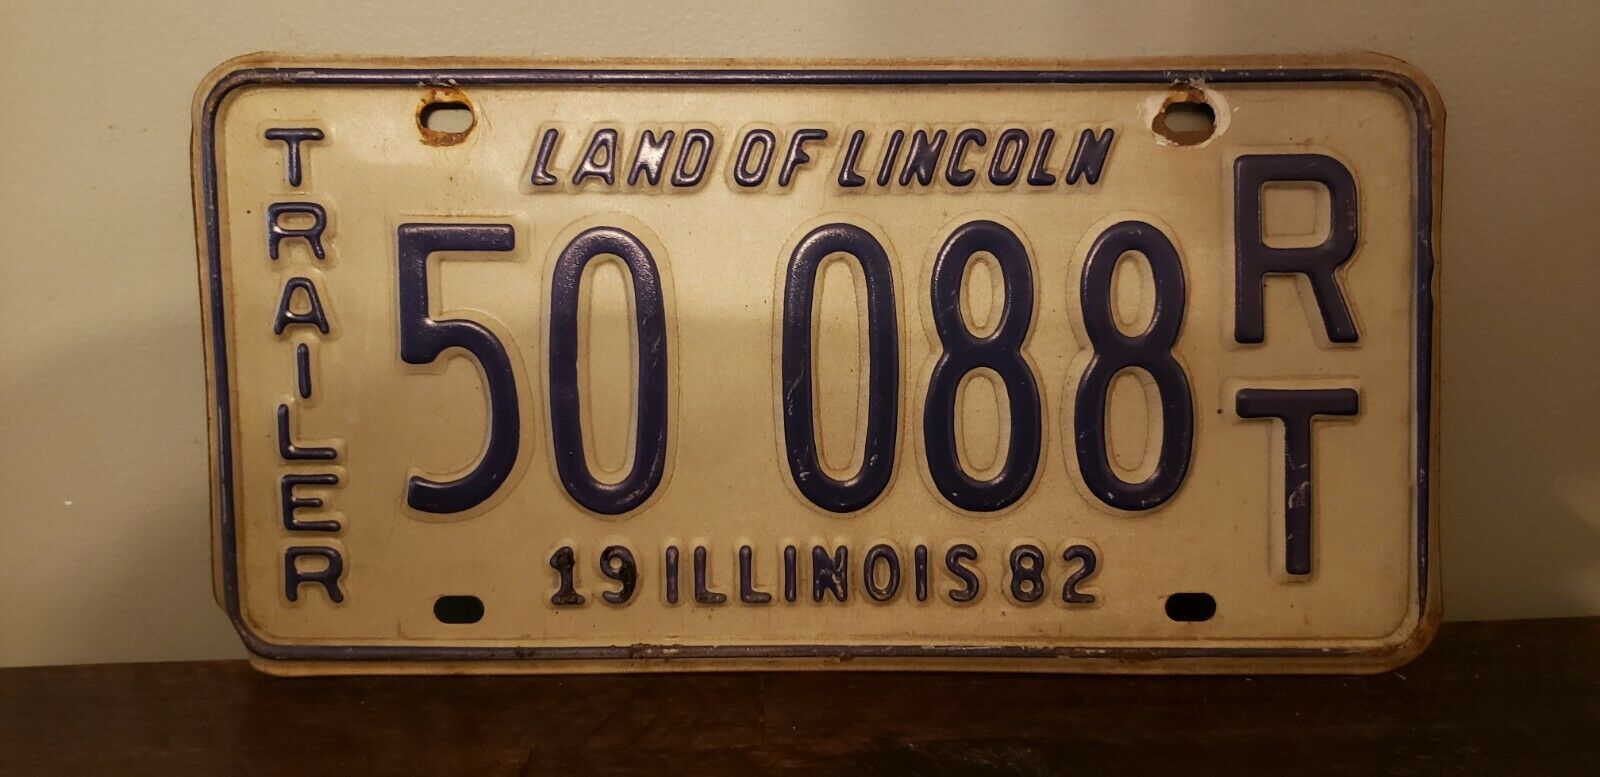 1982 Original Illinois Land Of Lincoln Trailer License Plate 50 088 Rt Free S/h